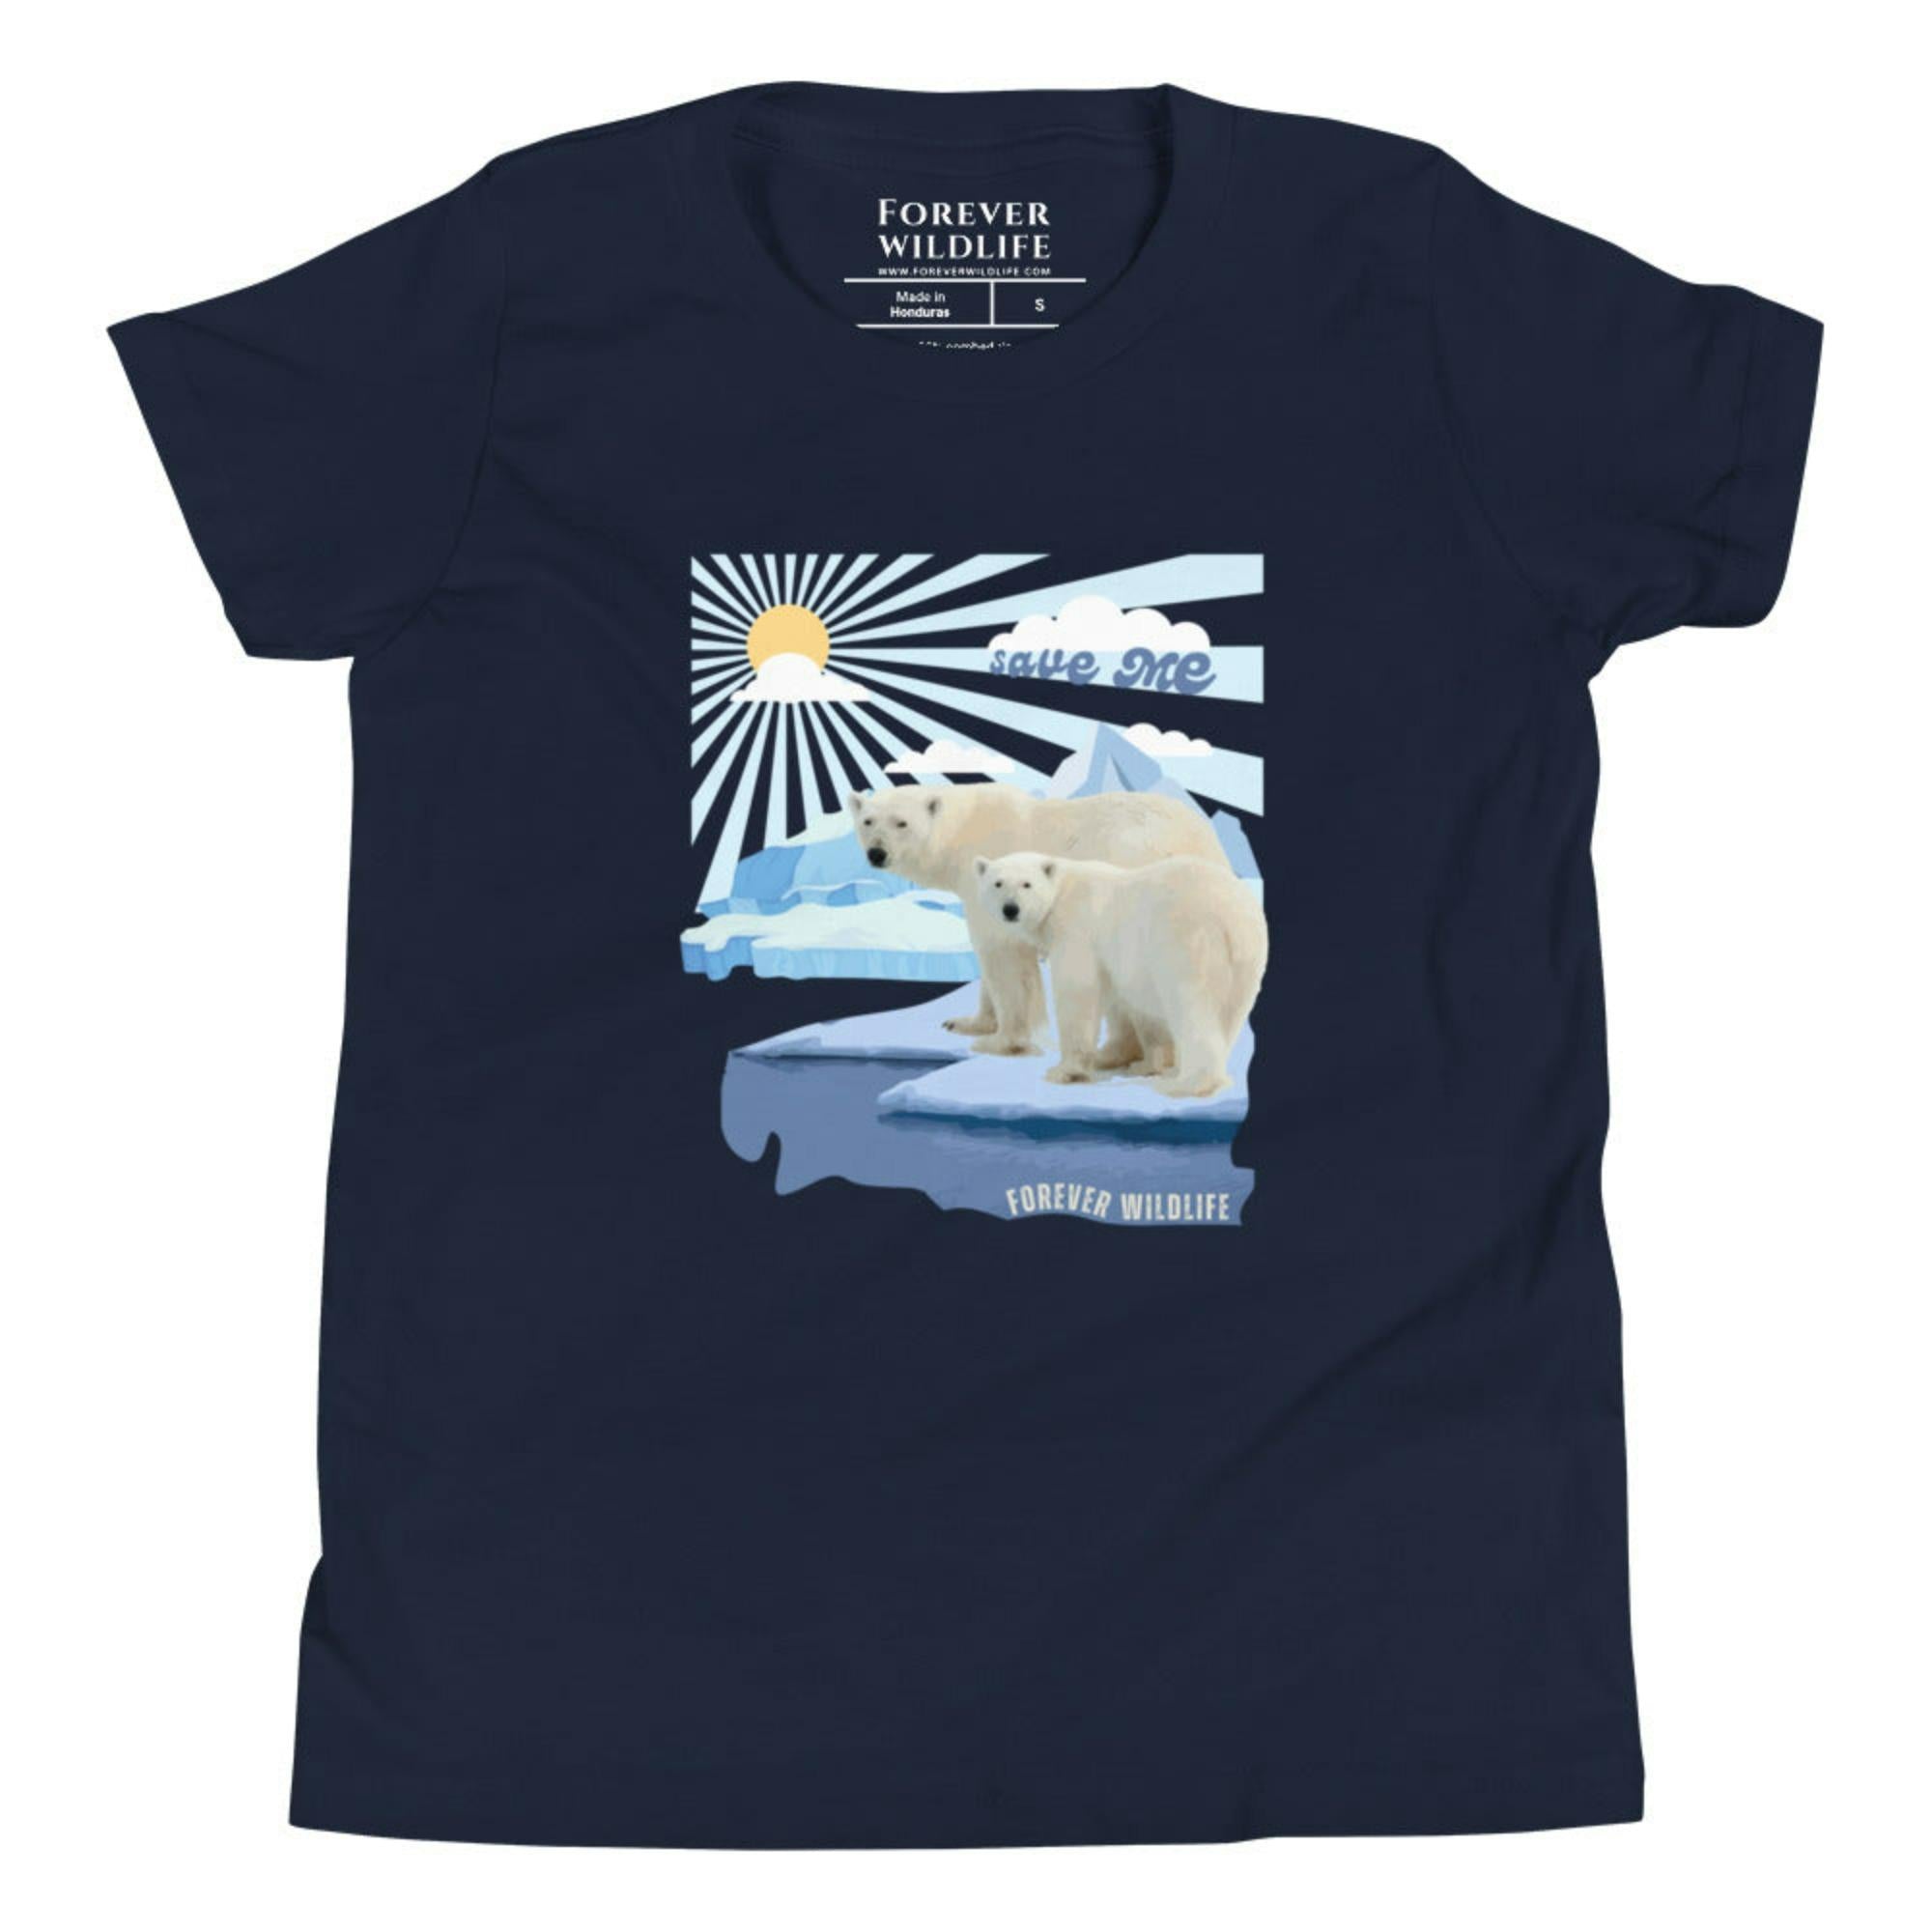 Save Polar Bears Youth T-Shirt-Wildlife Youth Clothes|Forever Wildlife Navy / L